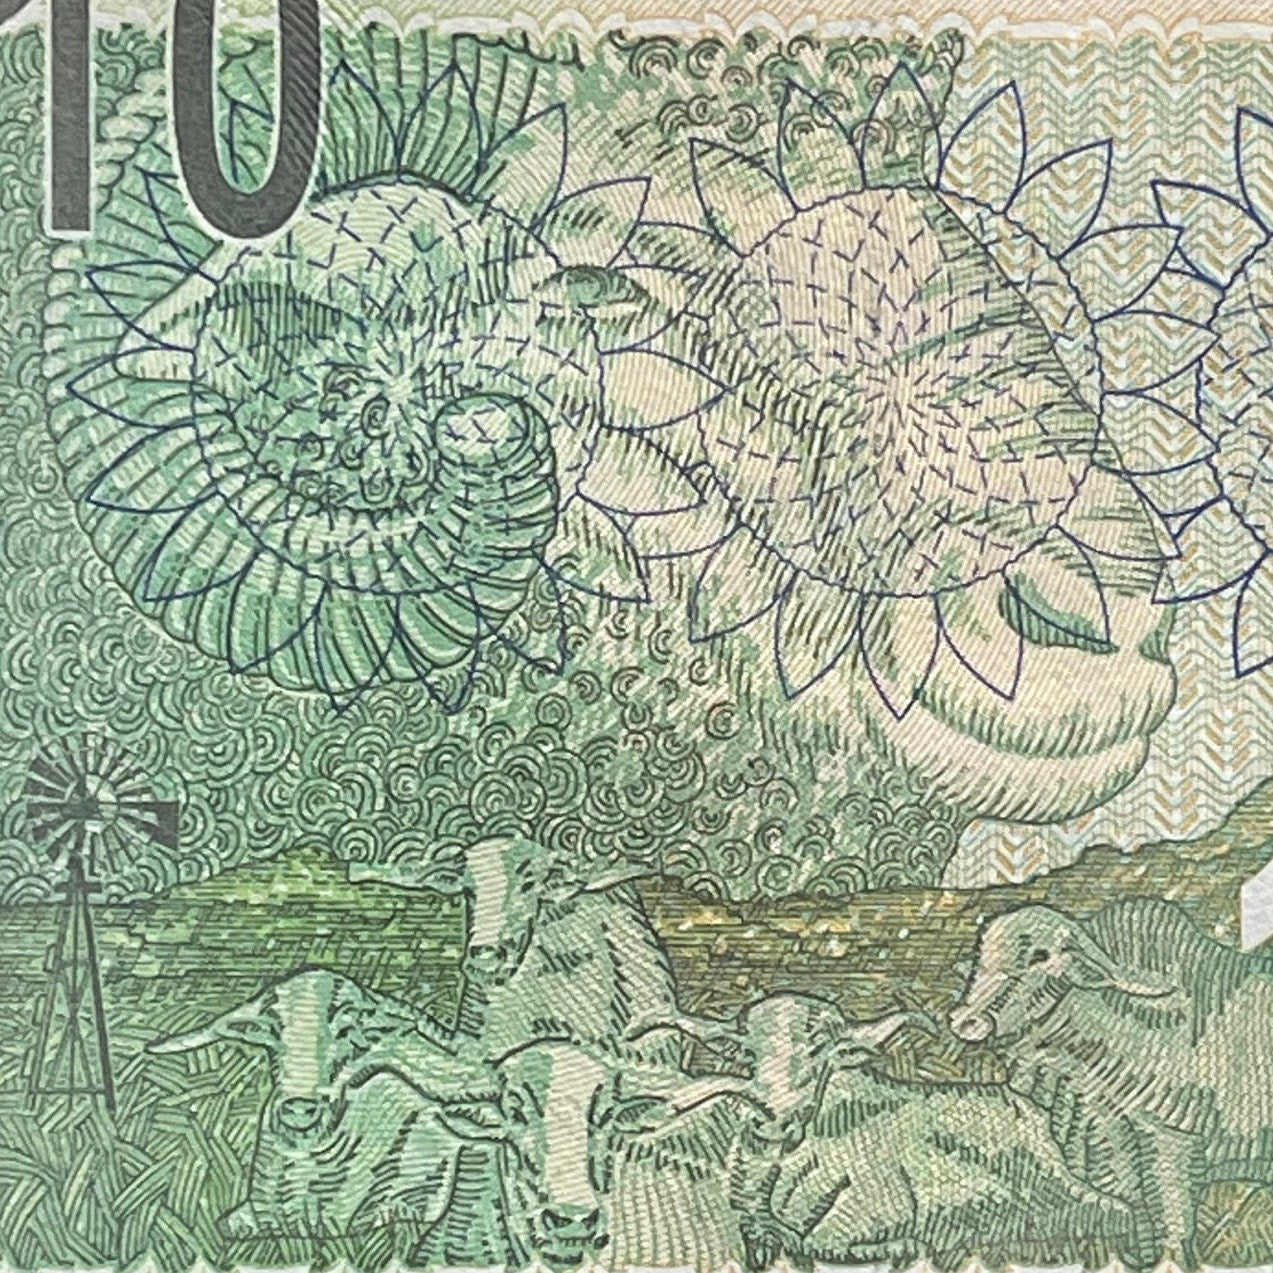 Southern White Rhino Family & Sheep Family 10 Rand South Africa Authentic Banknote Money for Jewelry and Collage